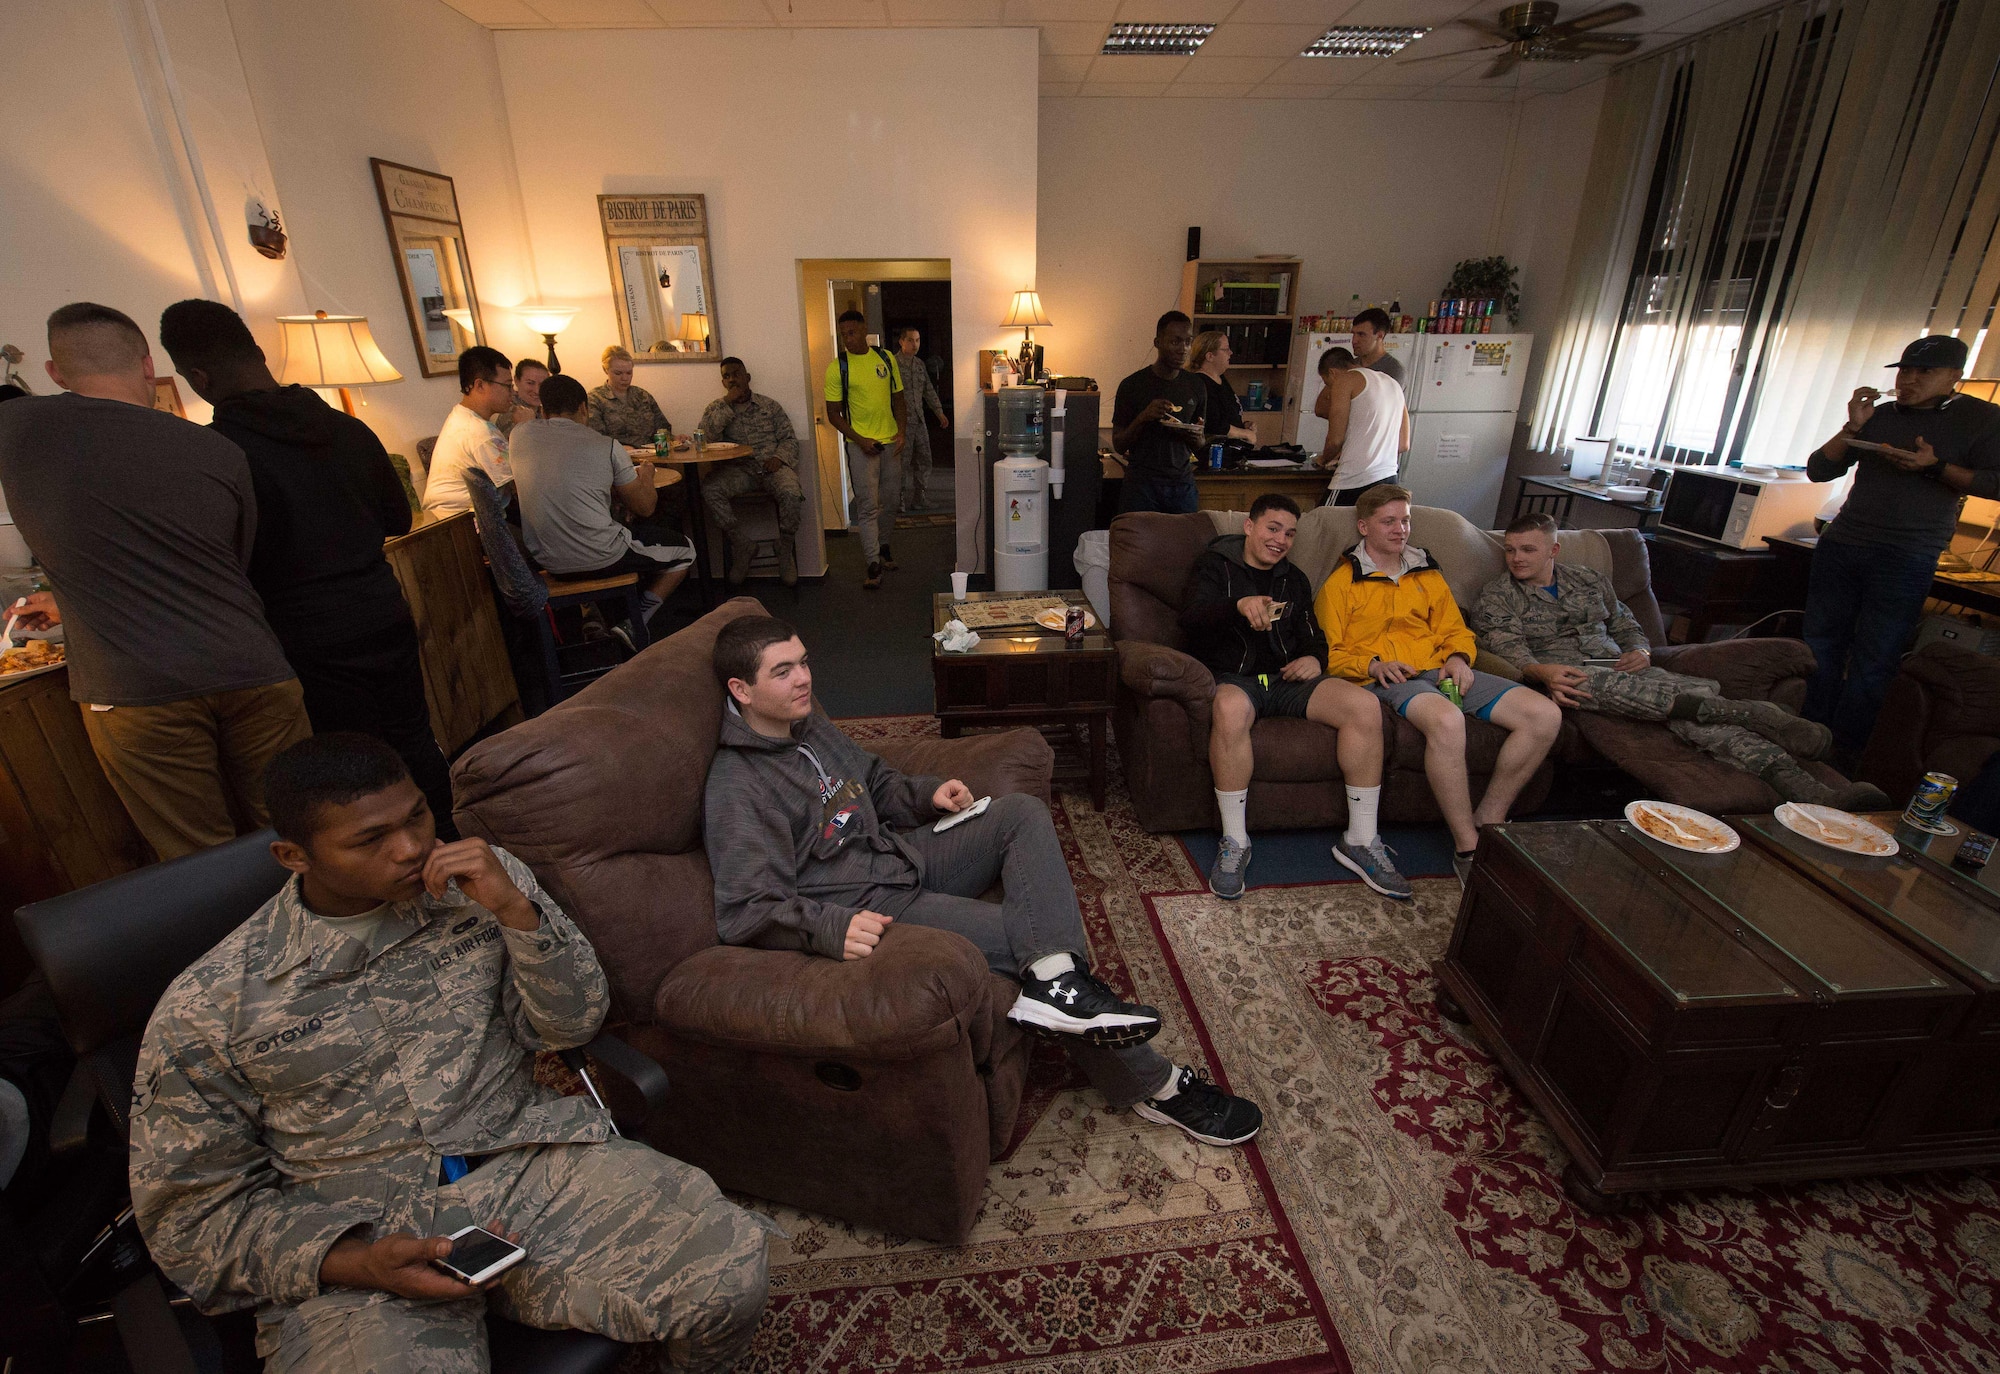 Airmen eat, socialize, and watch a movie at Club 7 on Ramstein Air Base, June 10, 2017. Run by the 86th Airlift Wing Chapel, Club 7 is designed to encourage morale and friendship by inviting junior enlisted Airmen to come and enjoy services such as videogames, Wi-Fi and food. (U.S. Air Force photo by Senior Airman Elizabeth Baker)